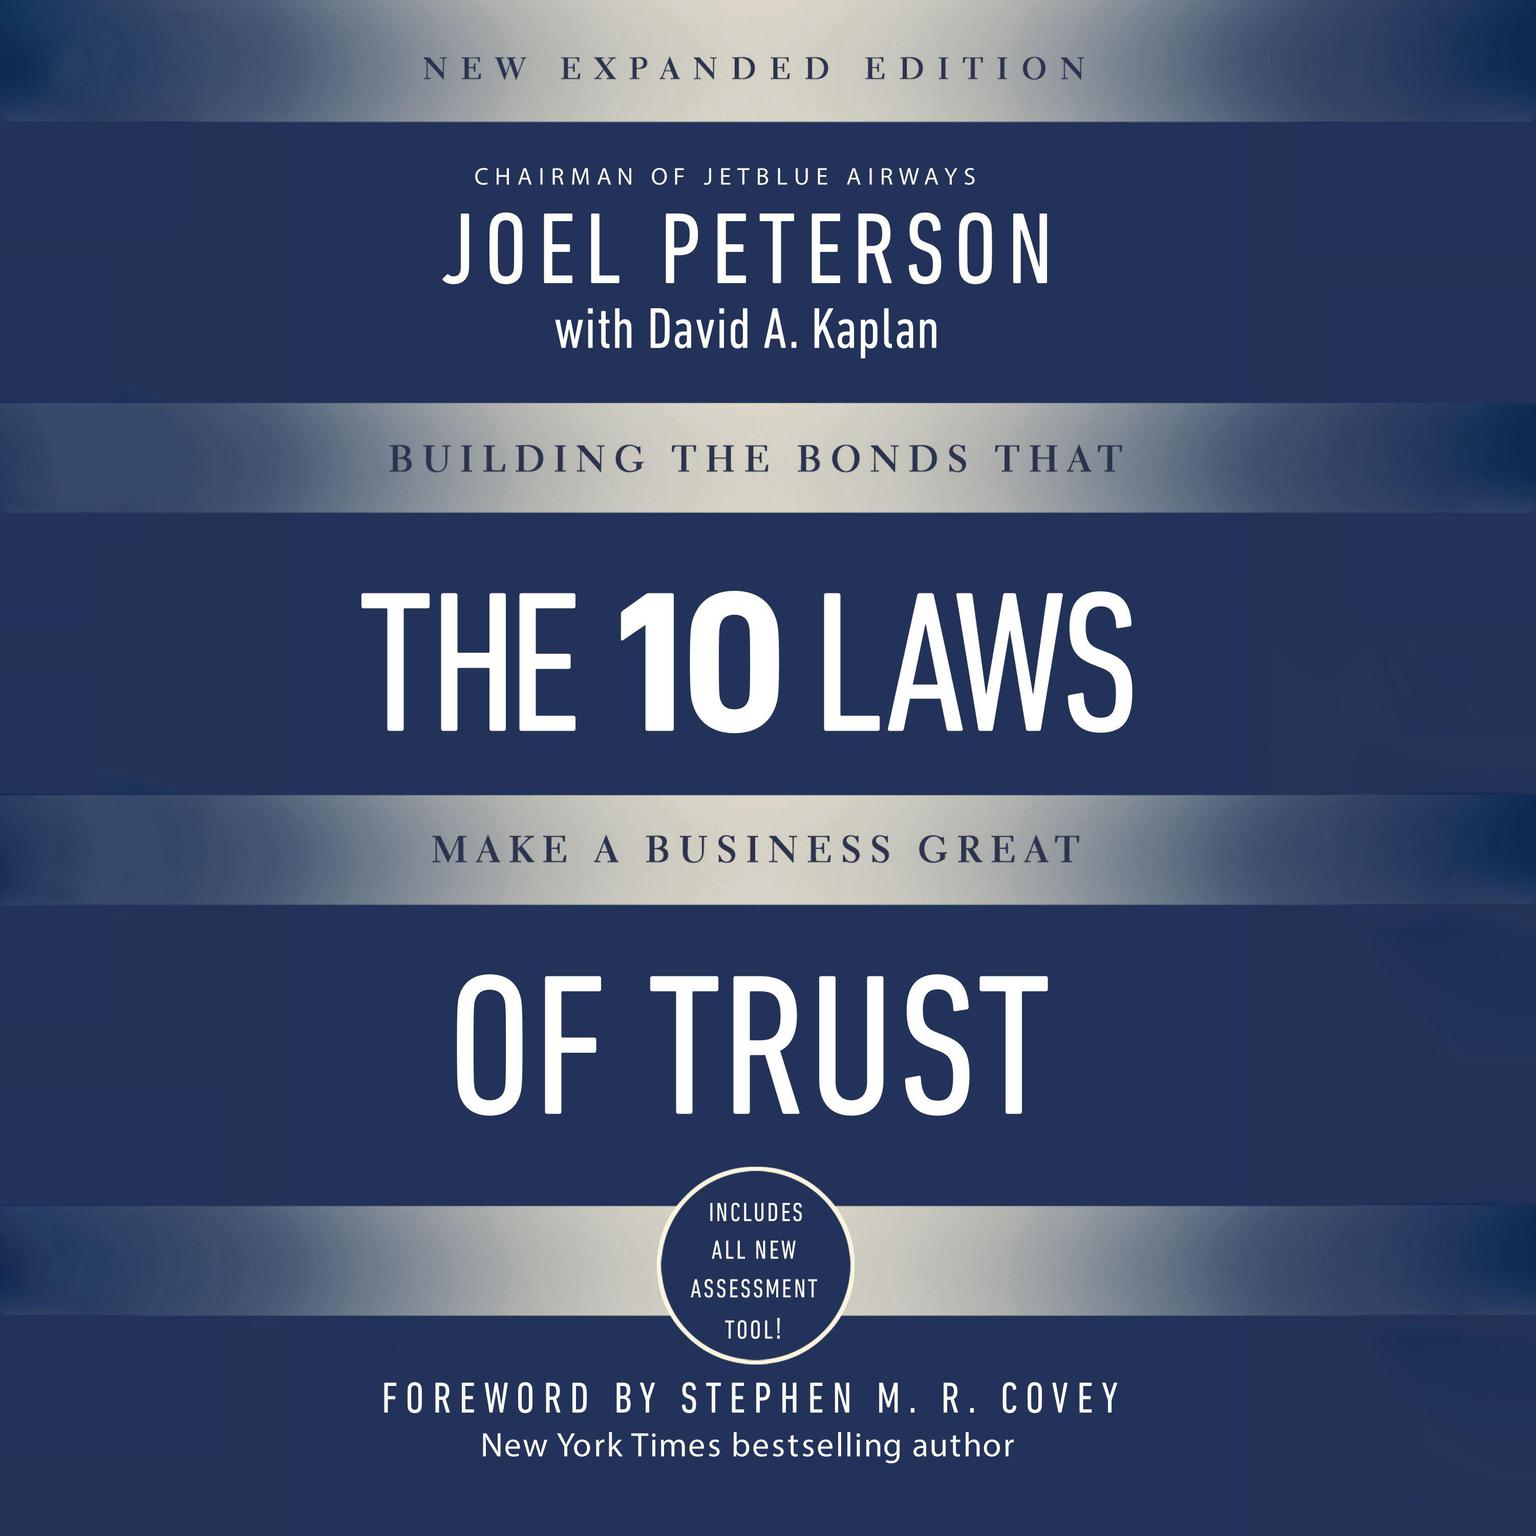 The 10 Laws of Trust (Expanded Edition): Building the Bonds That Make a Business Great Audiobook, by Joel Peterson